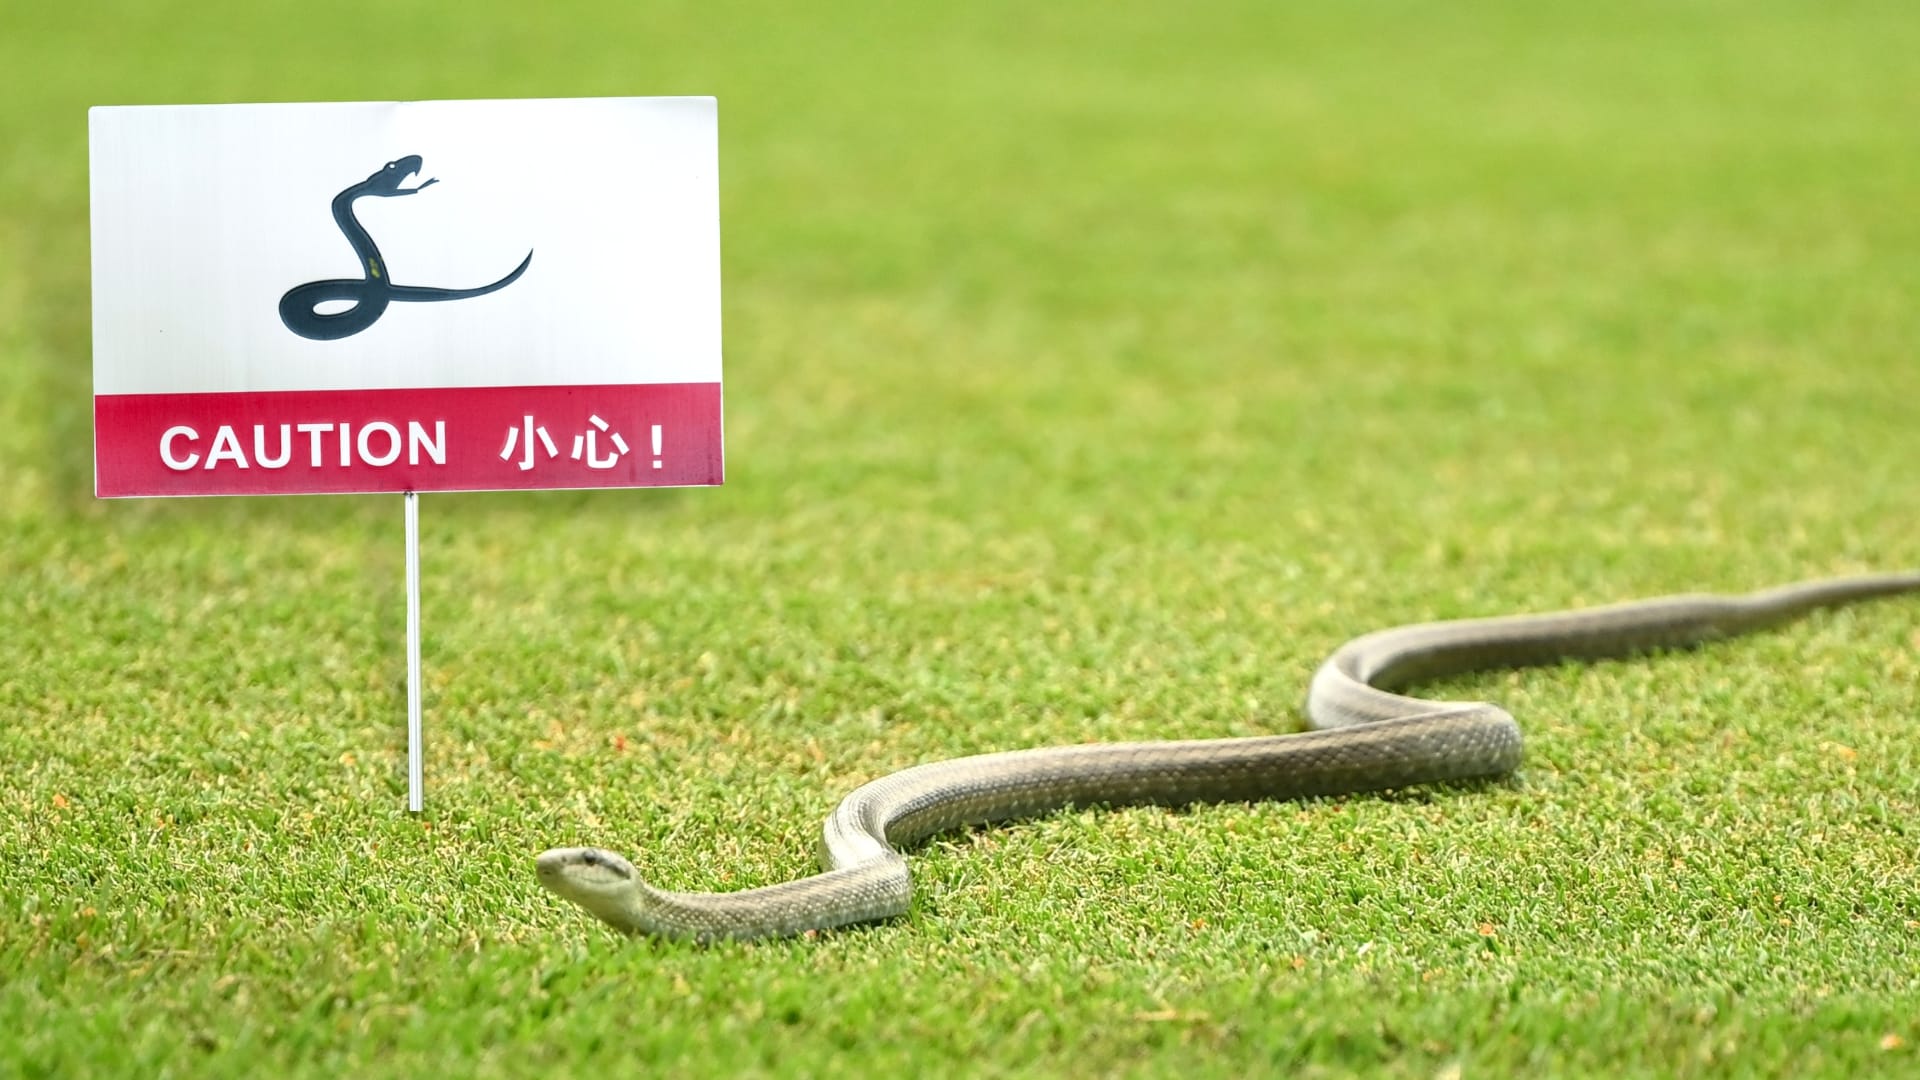 Snake on the course! Aussie players discover deadly creature hiding in cup